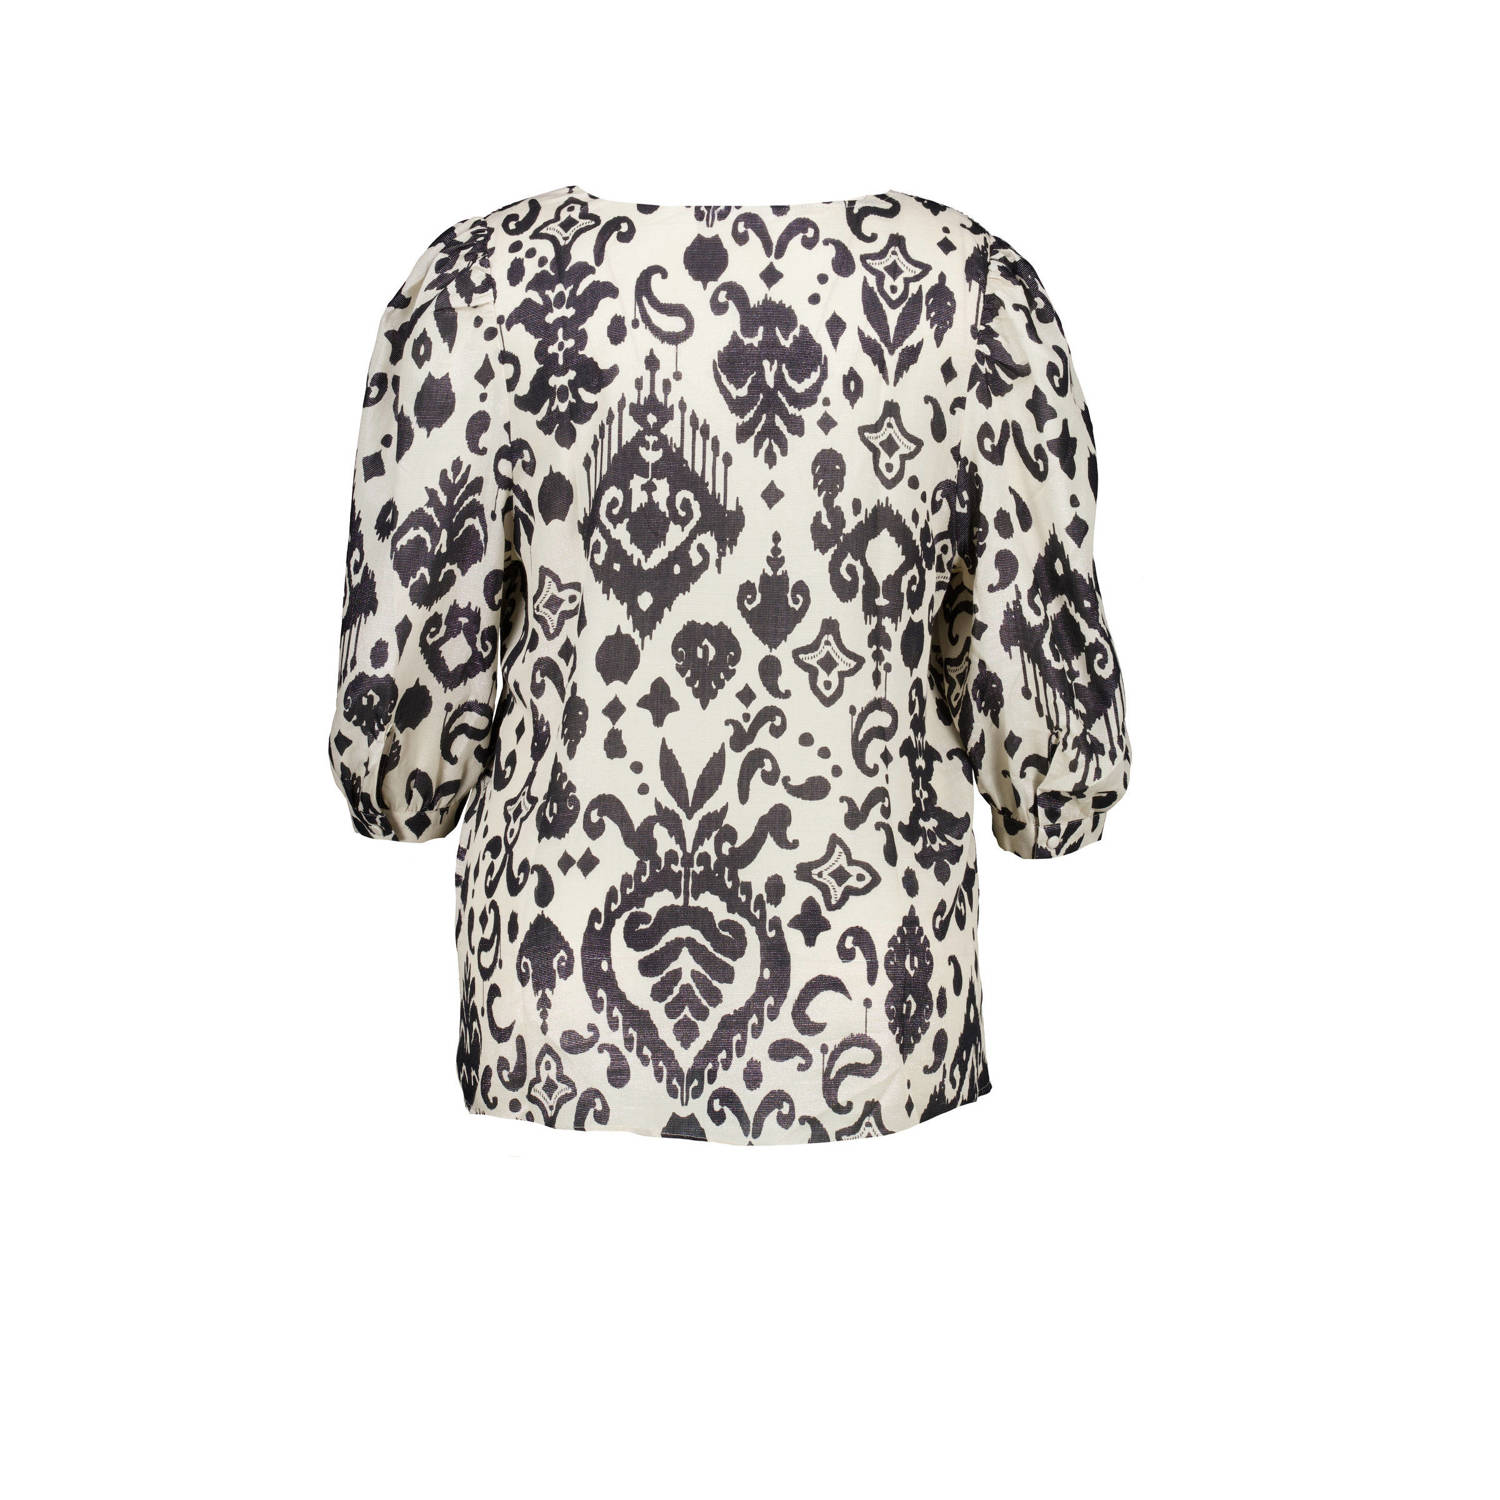 MS Mode blouse met all over print